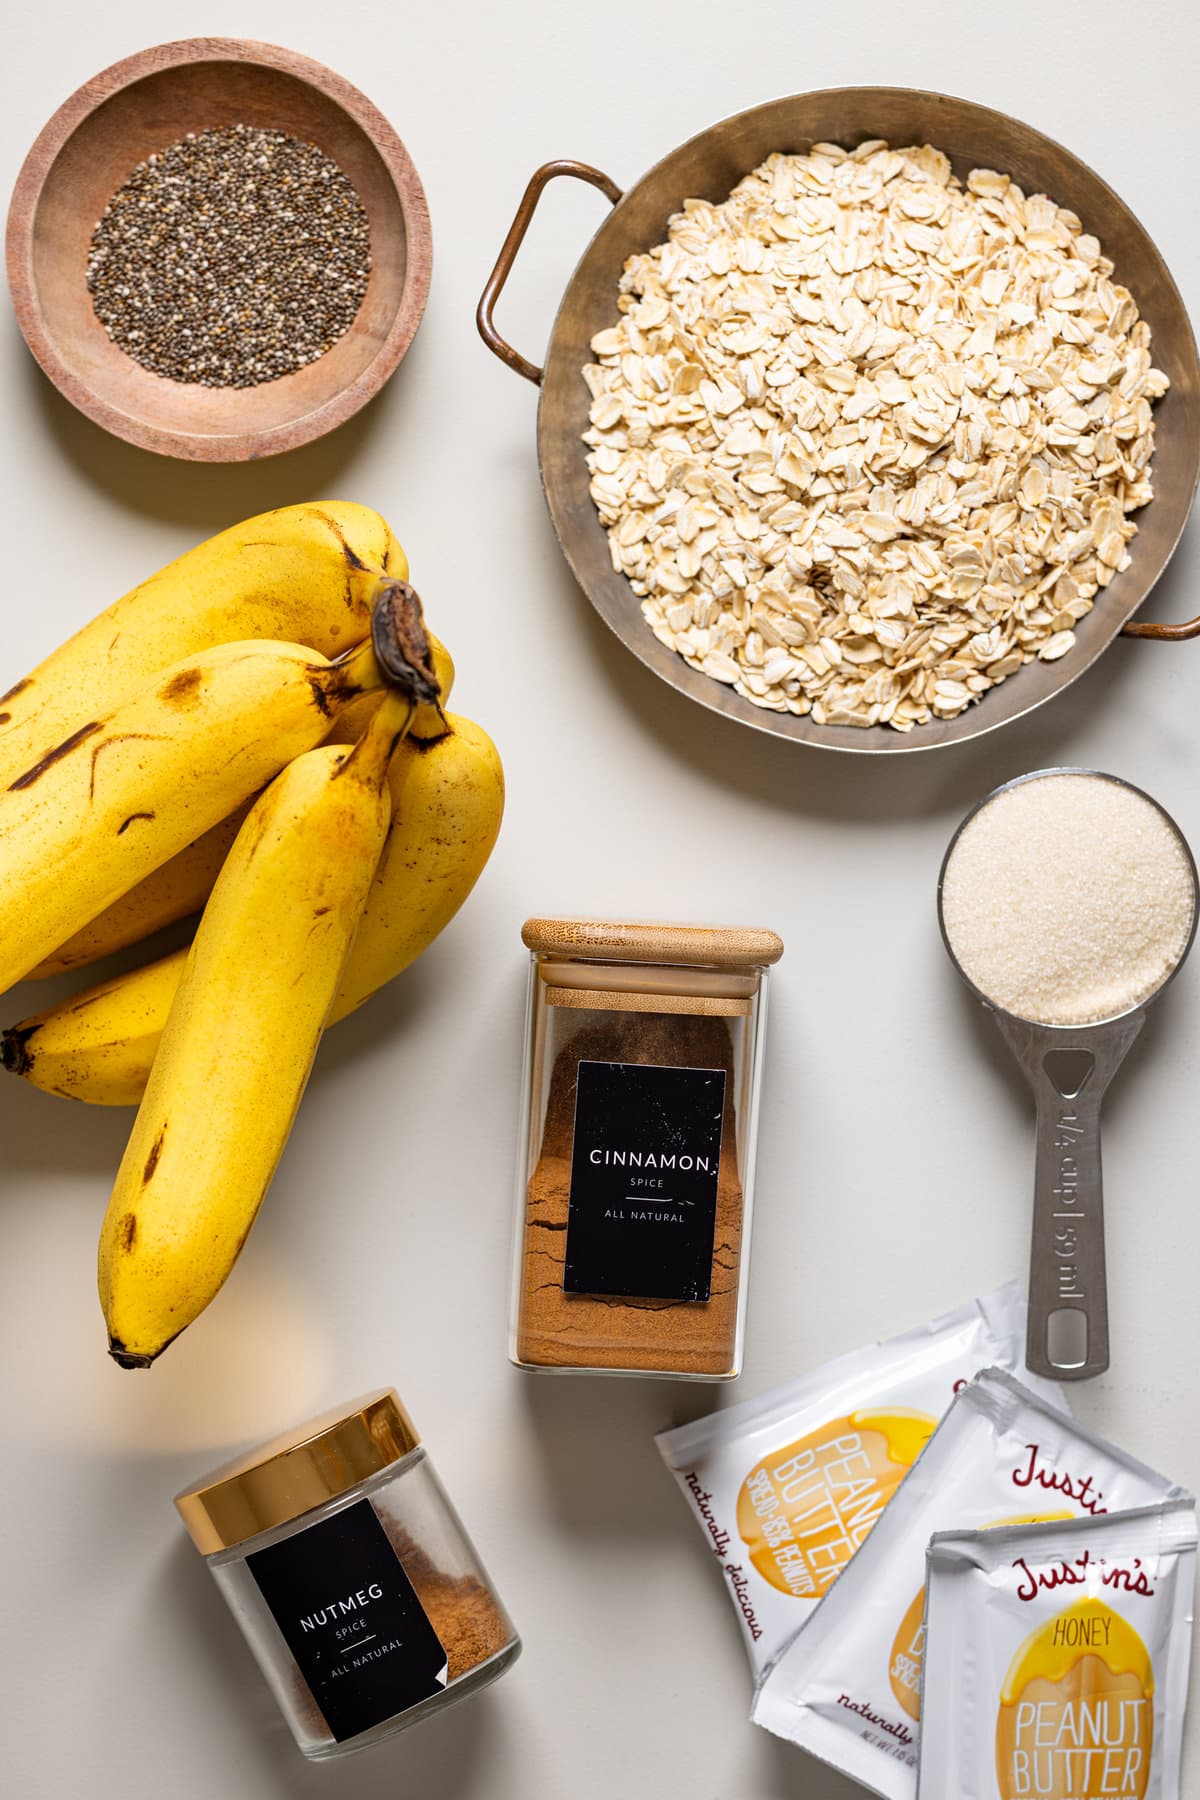 Ingredients for Protein Peanut Butter Banana Chia Oatmeal including bananas, cinnamon, and honey peanut butter